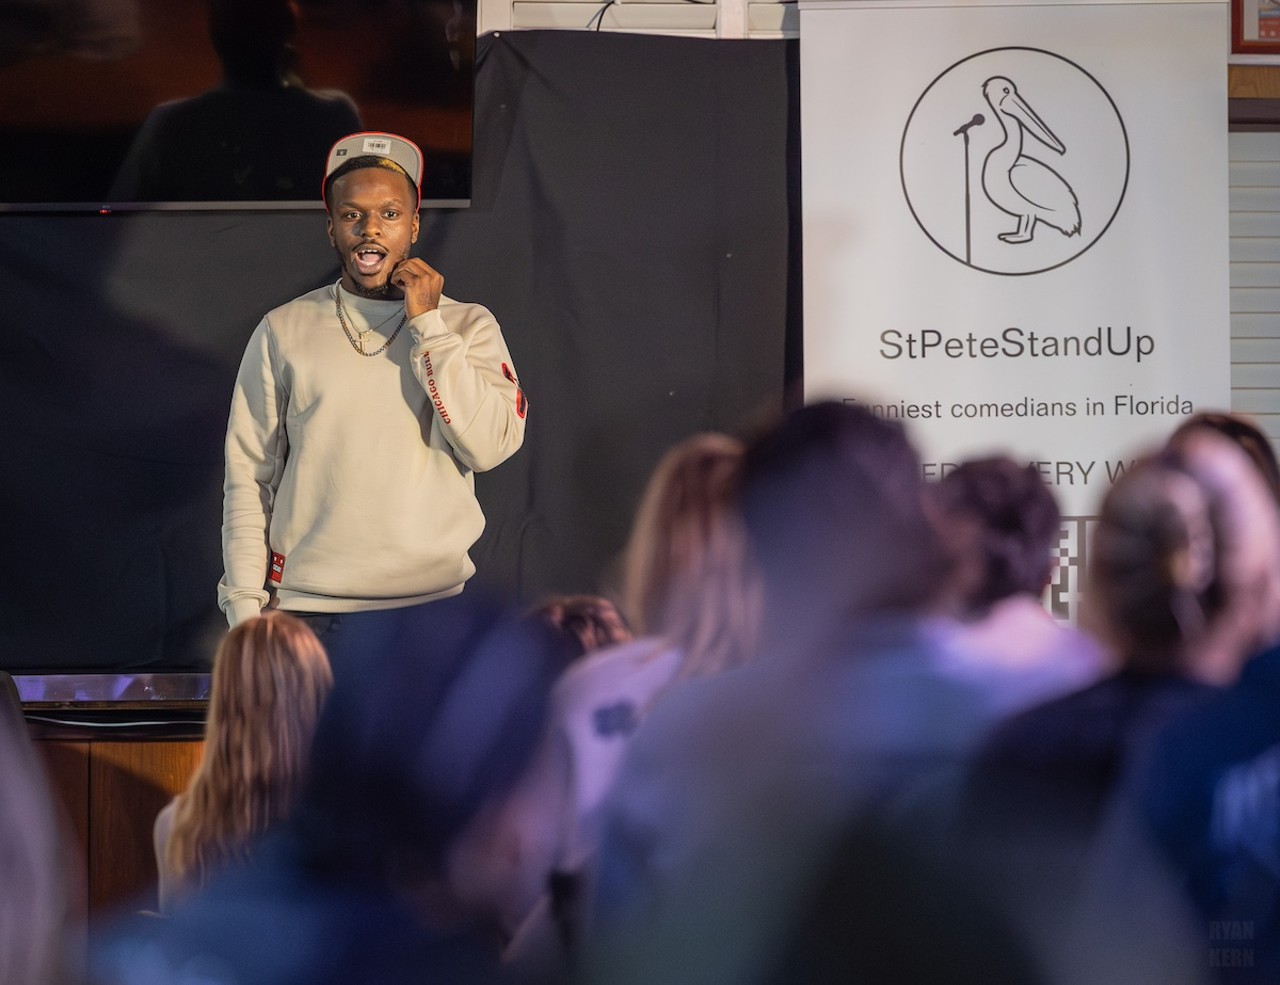 Photos: St. Pete Stand Up series brings comedy to Ferg’s